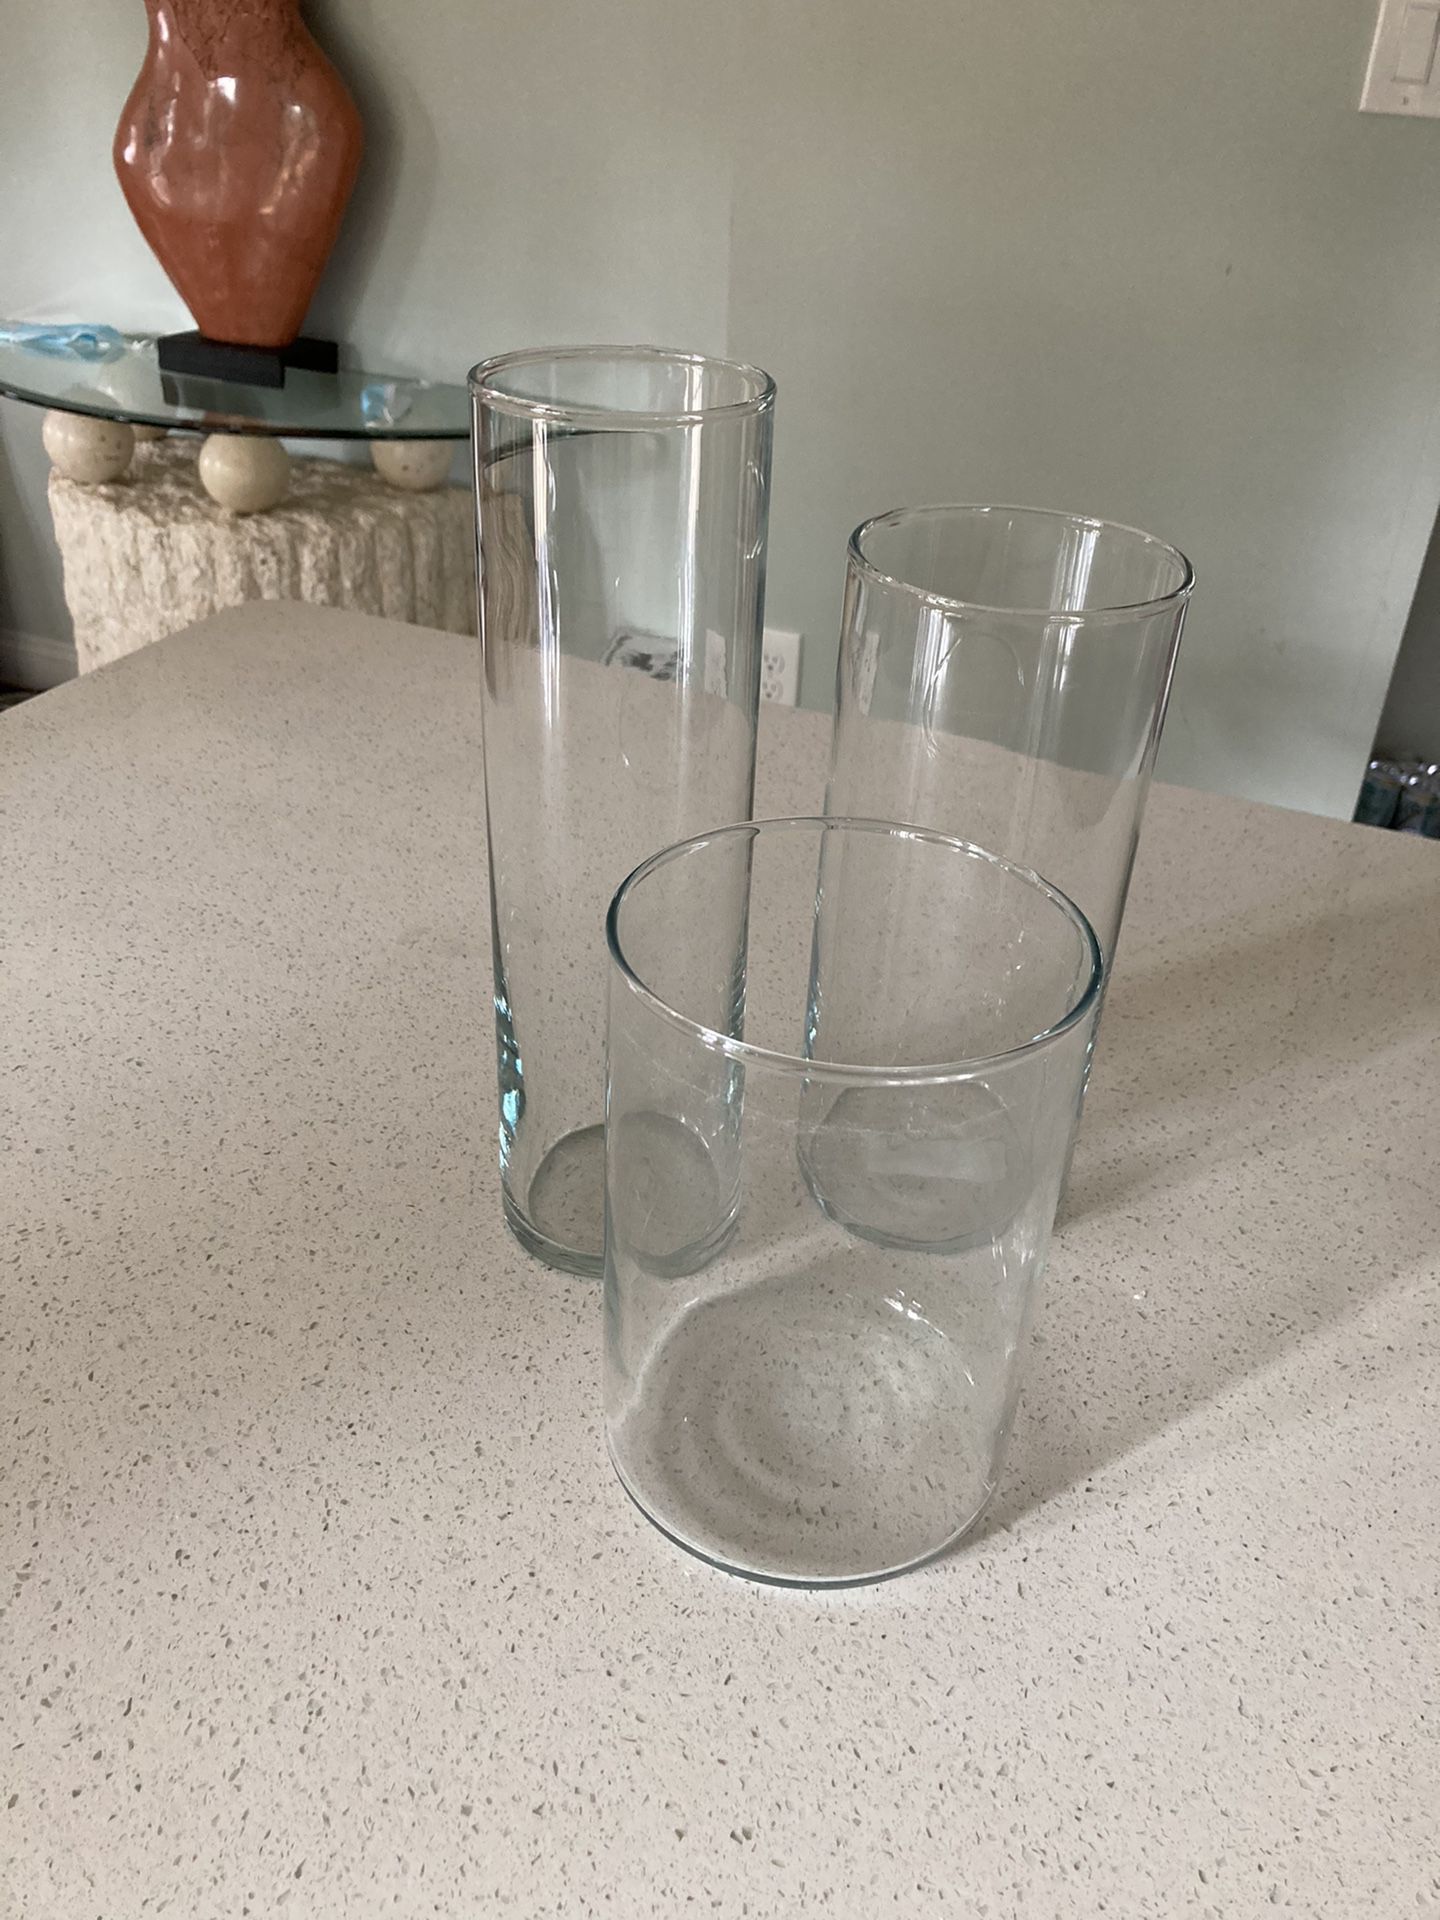 Free set of three decorative glass cylinders from IKEA